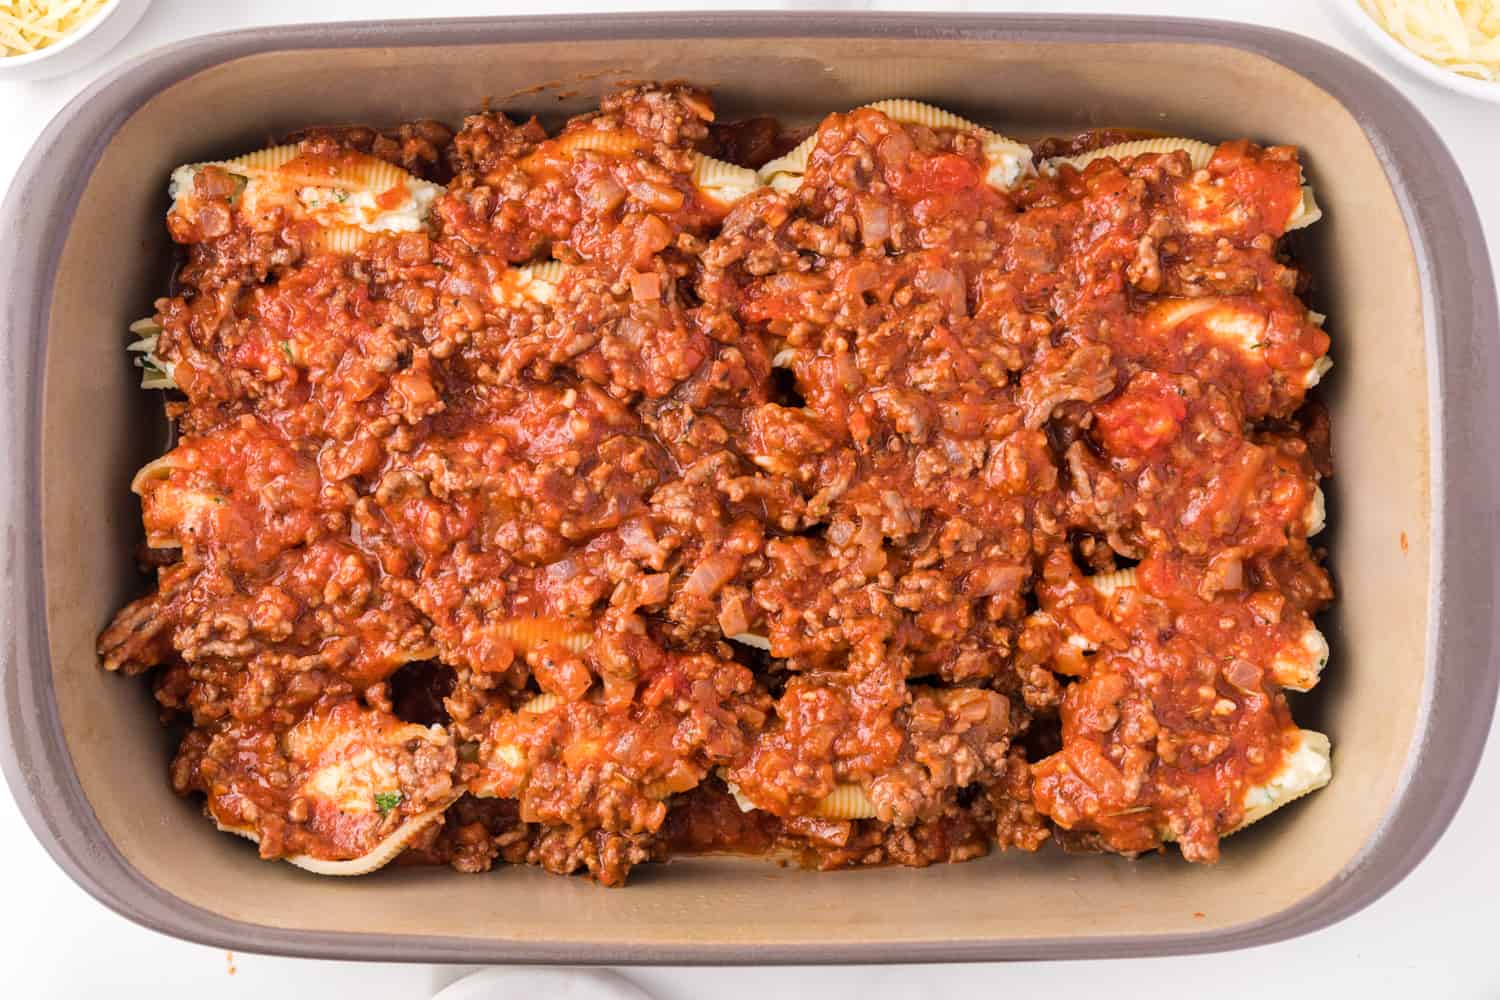 Meat sauce added on top of stuffed shells.